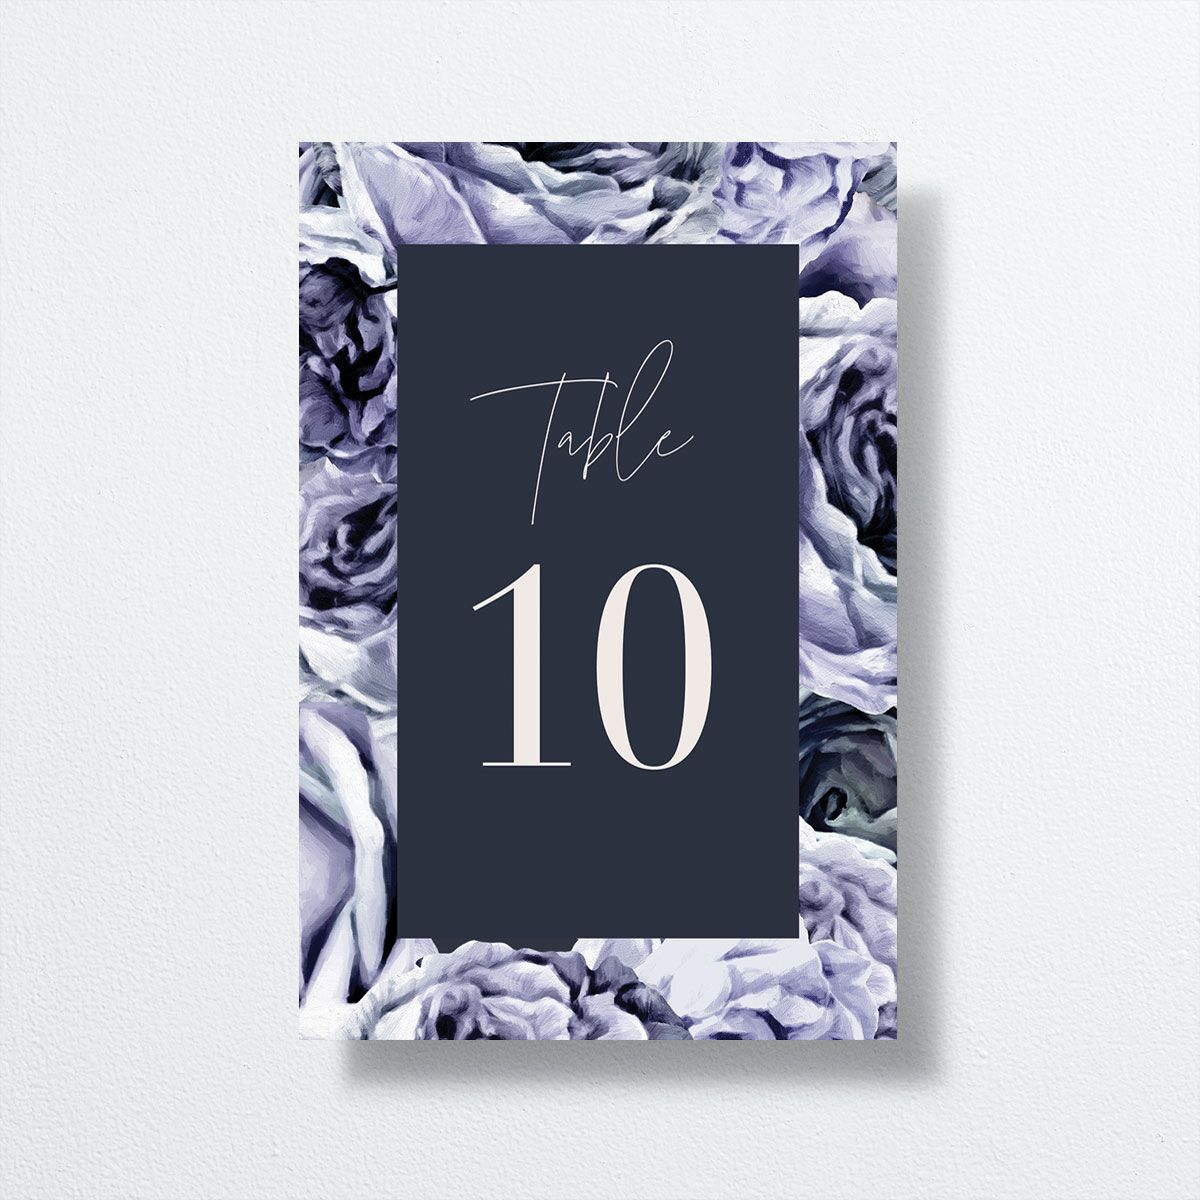 Rose Garden Table Numbers by Vera Wang front